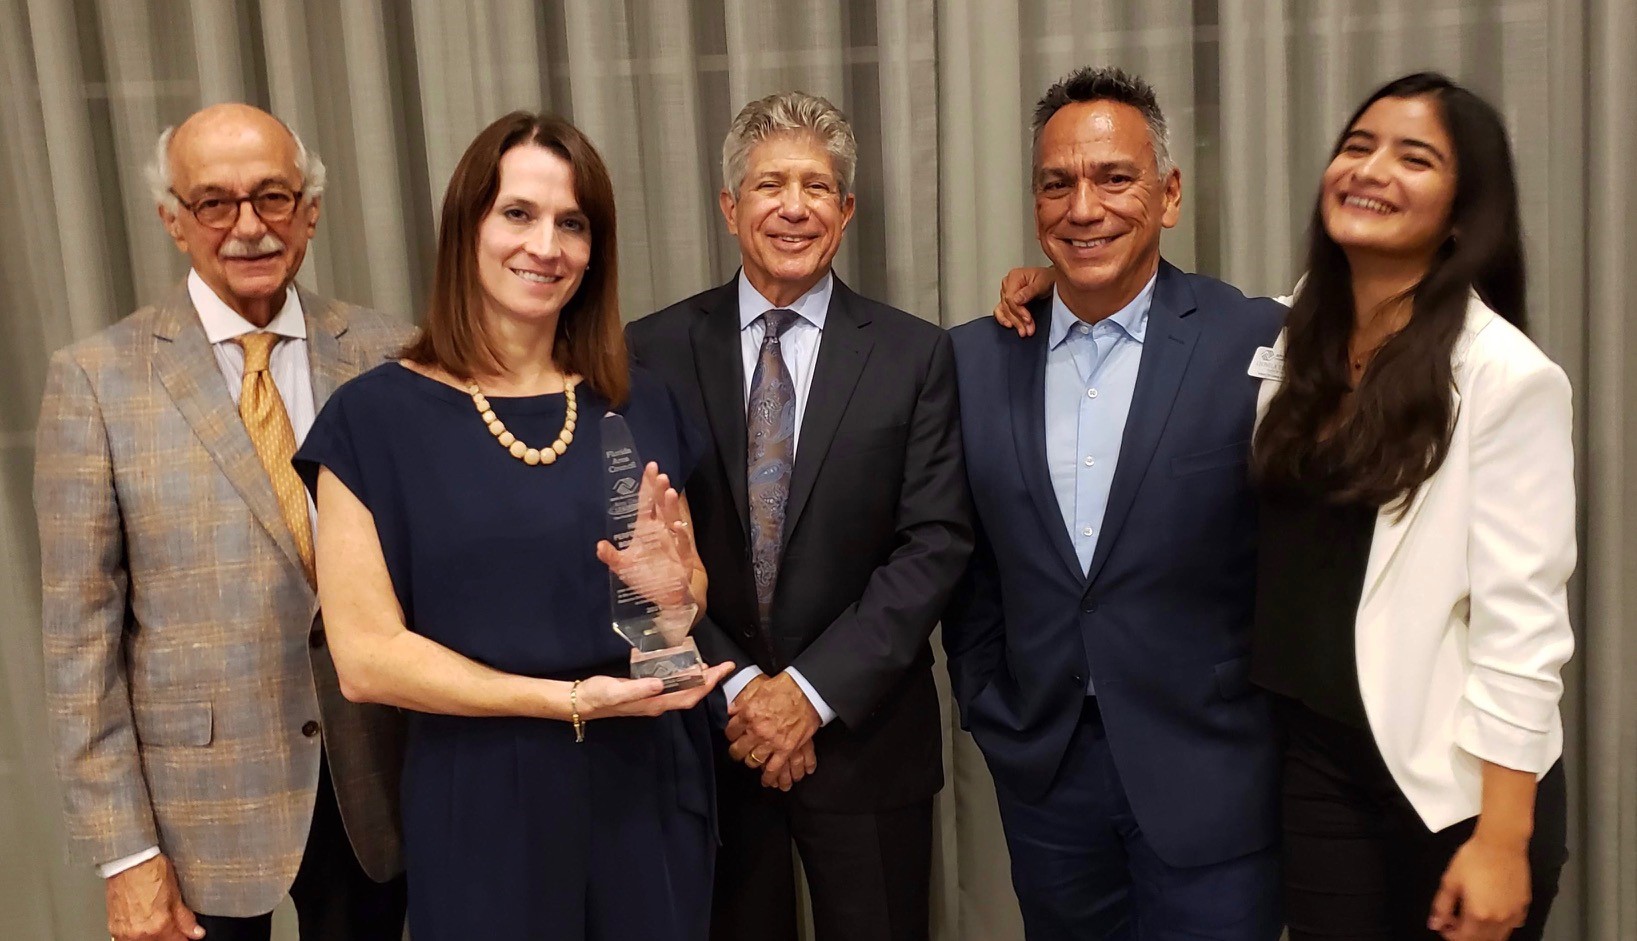 Meghan O. Serrano Honored as Part of the 2019 Board Team of the Year for the Boys & Girls Clubs of Sarasota County